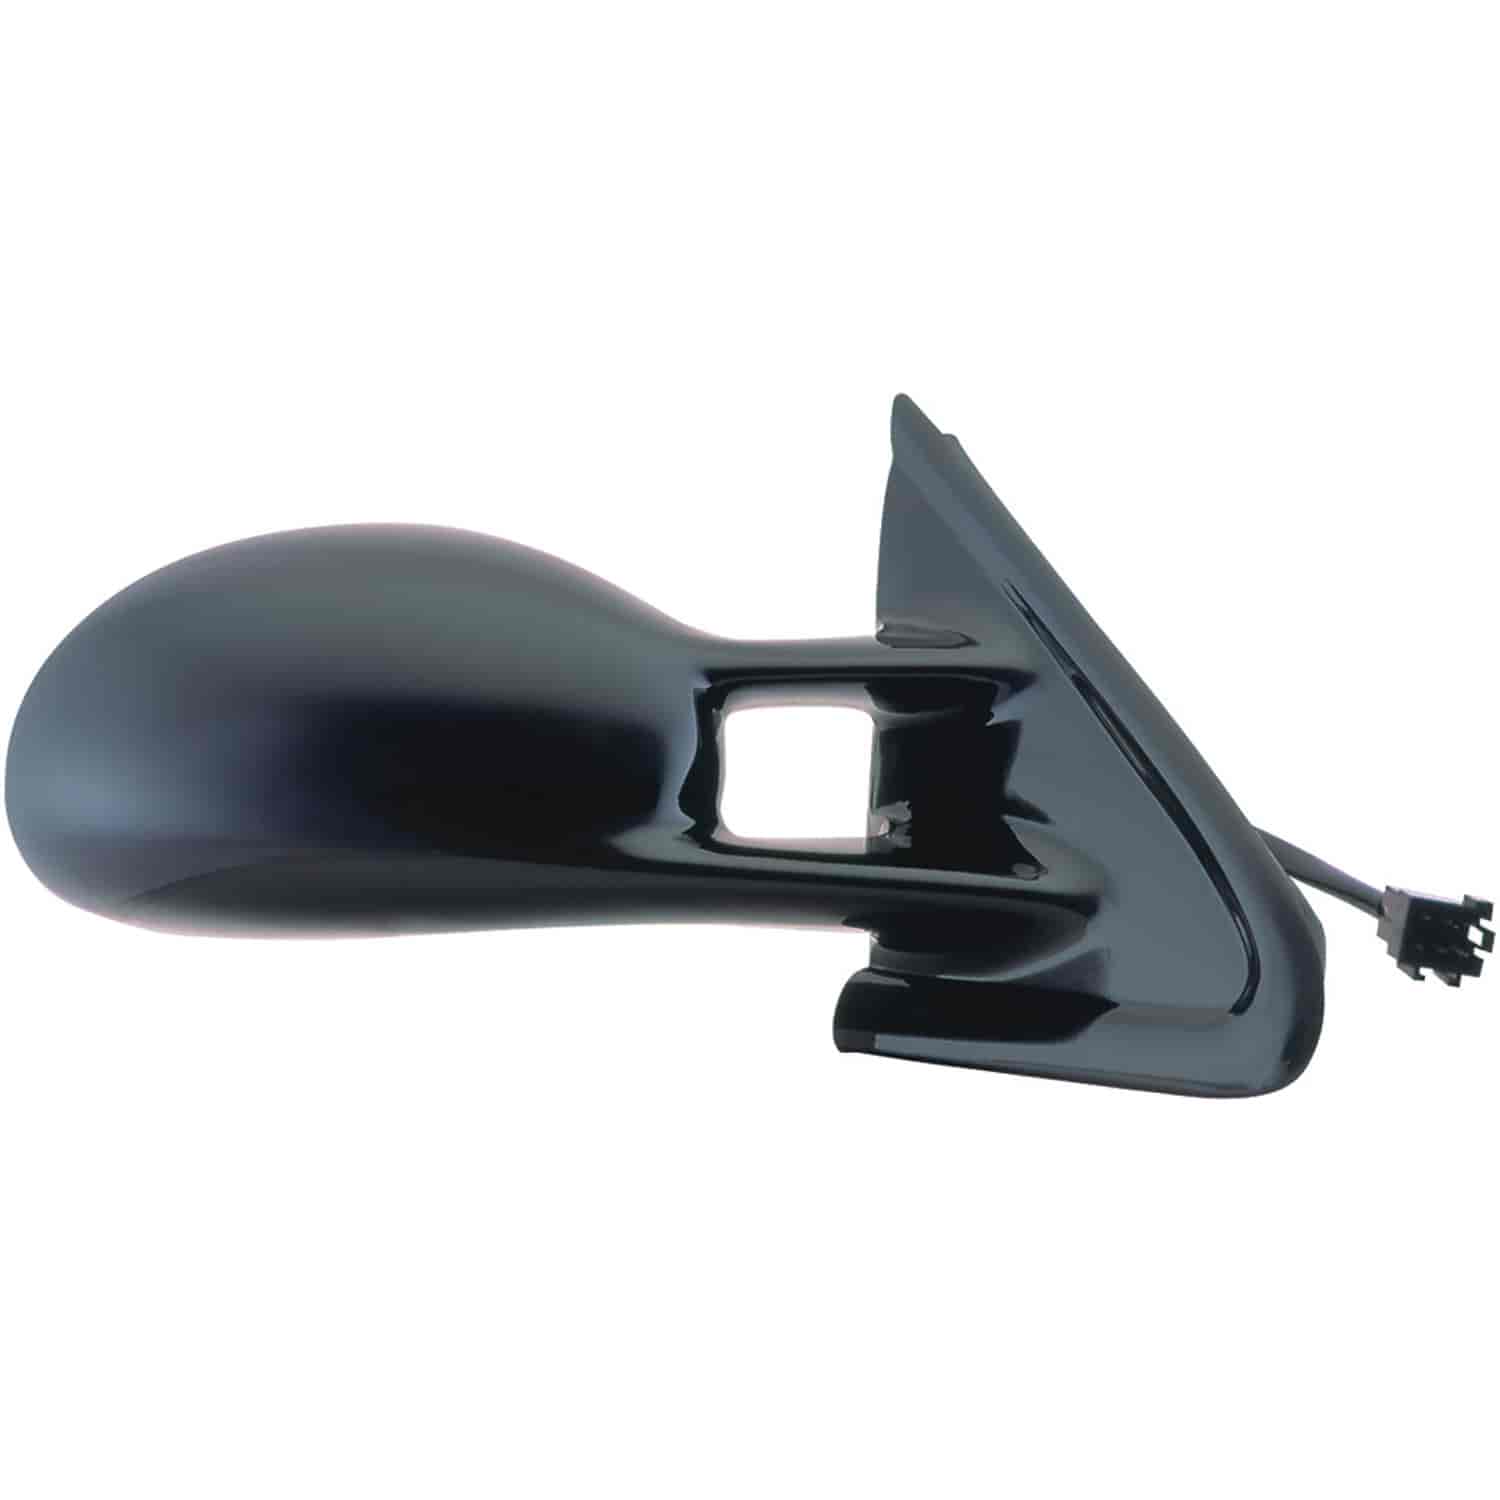 OEM Style Replacement mirror for 95-00 Chrysler Cirrus